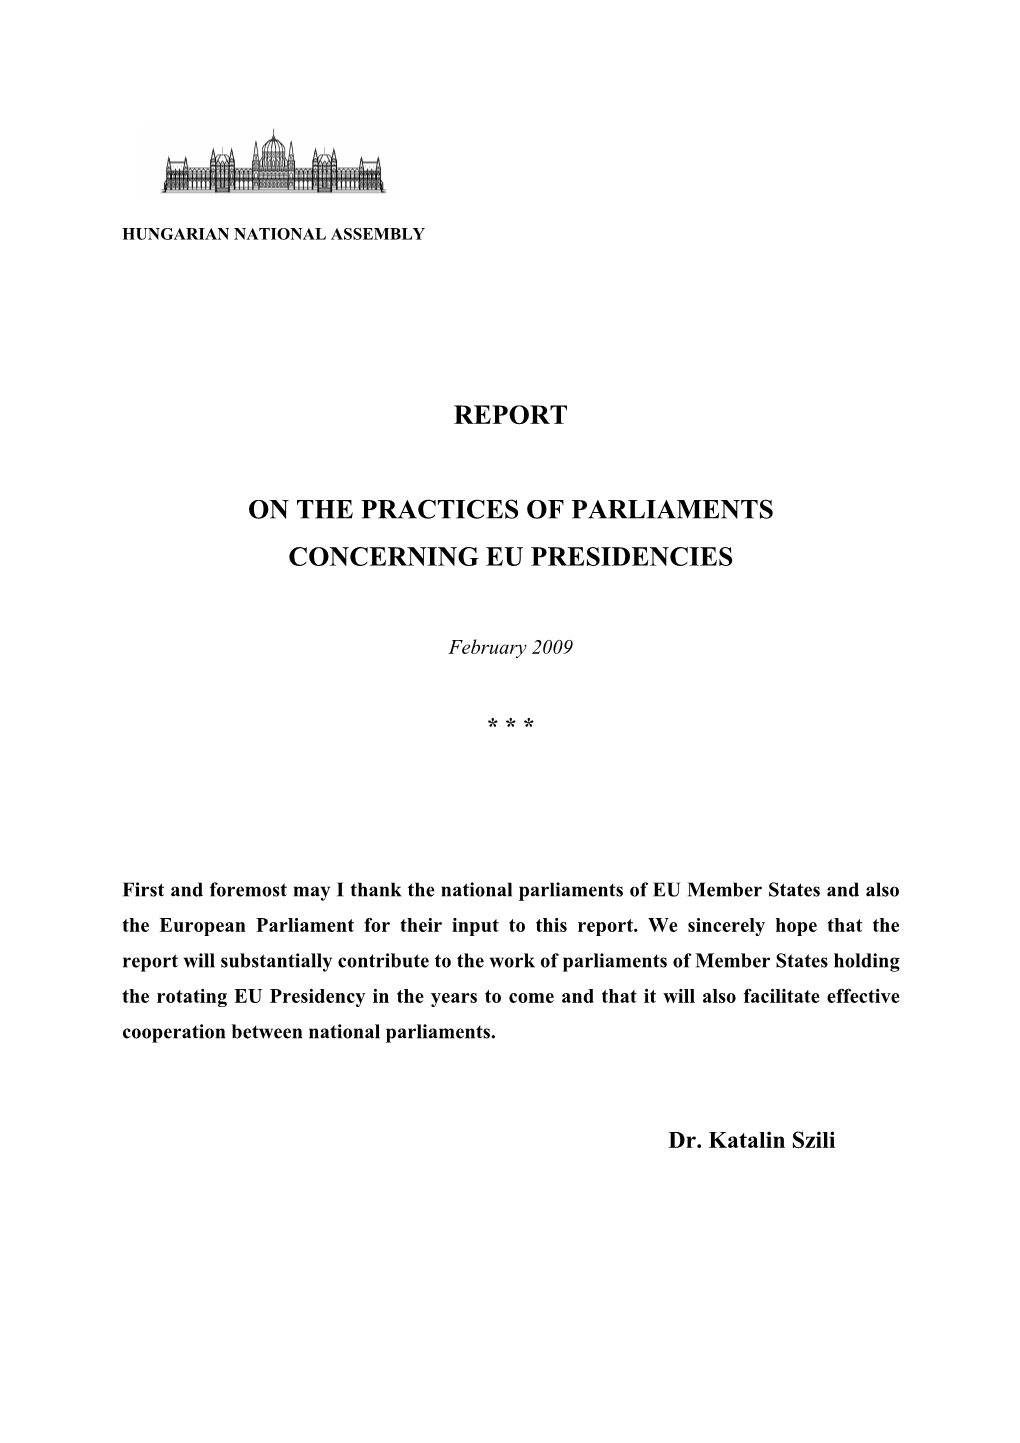 Report on the Practices of Parliaments Concerning Eu